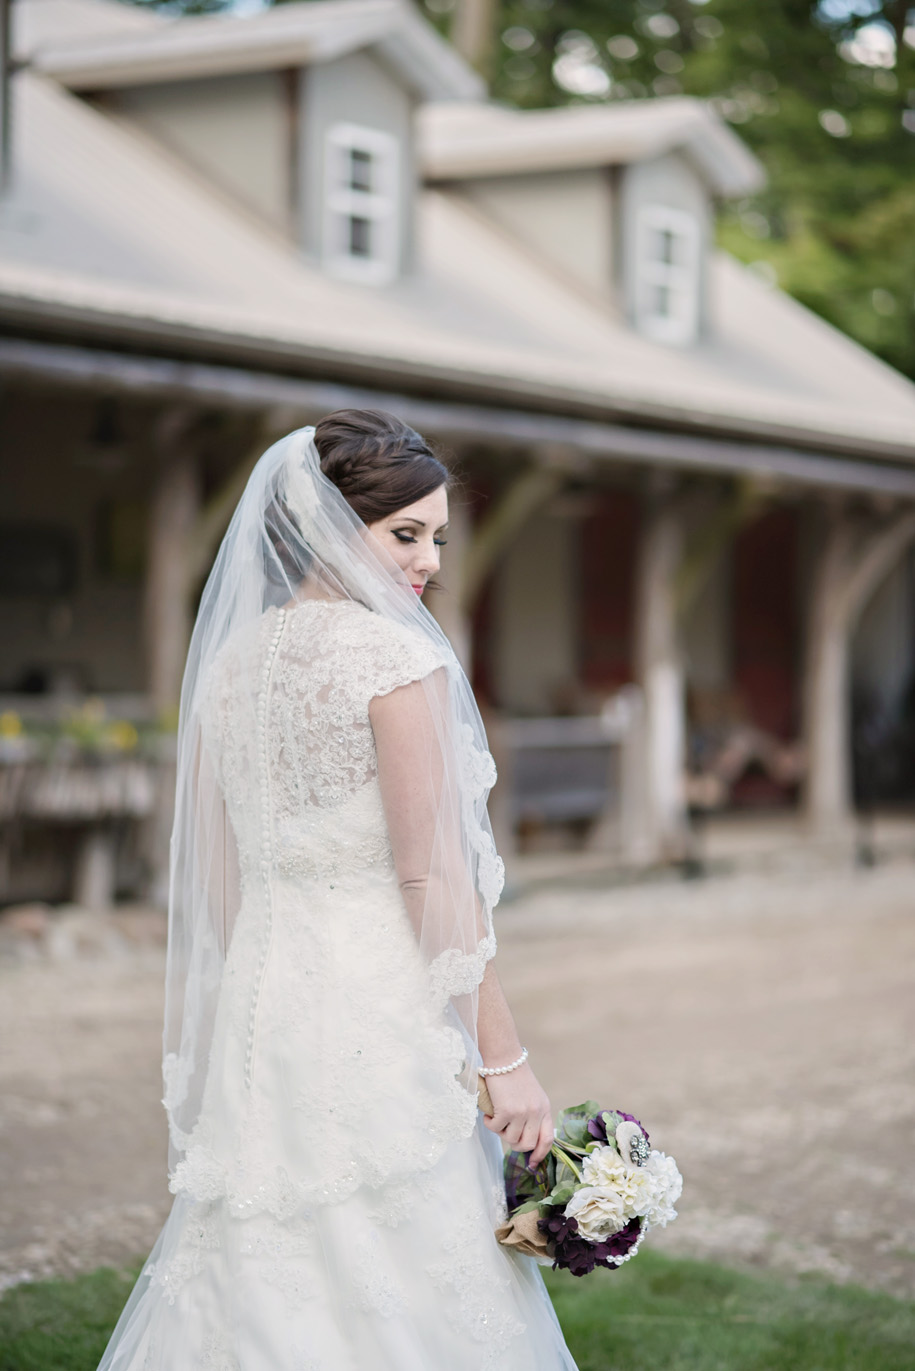 Stunning bride in her lace v-neck wedding gown with cap sleeve and high back lace l lace trimmed veil l Outdoor Inner Circle Estate Wedding by Kari Dawson